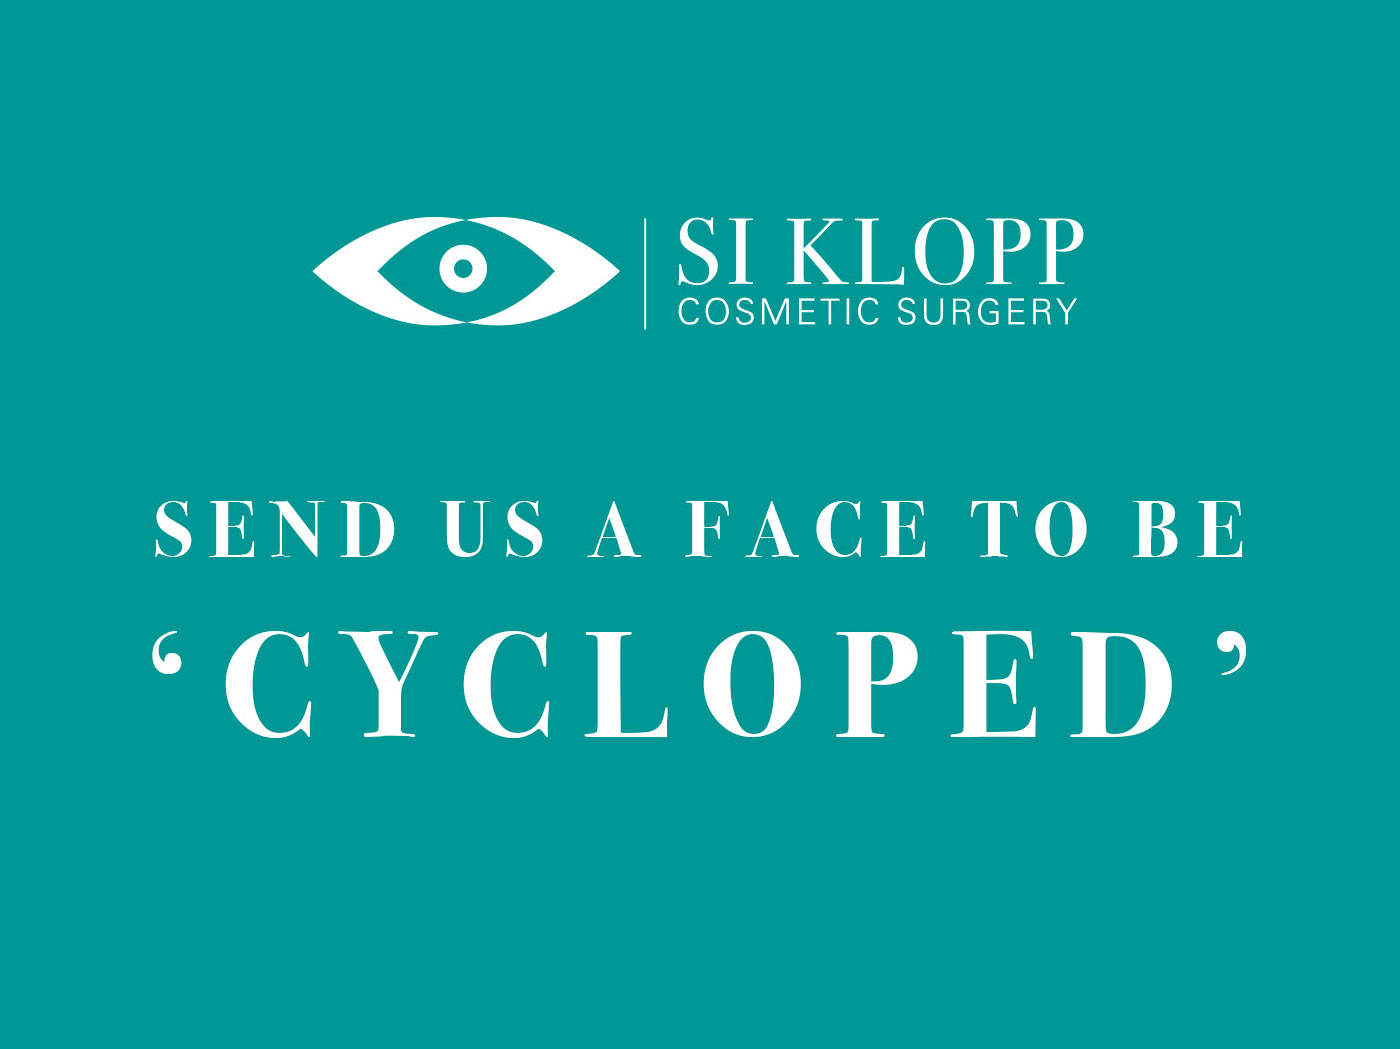 Send us a face to be Cycloped